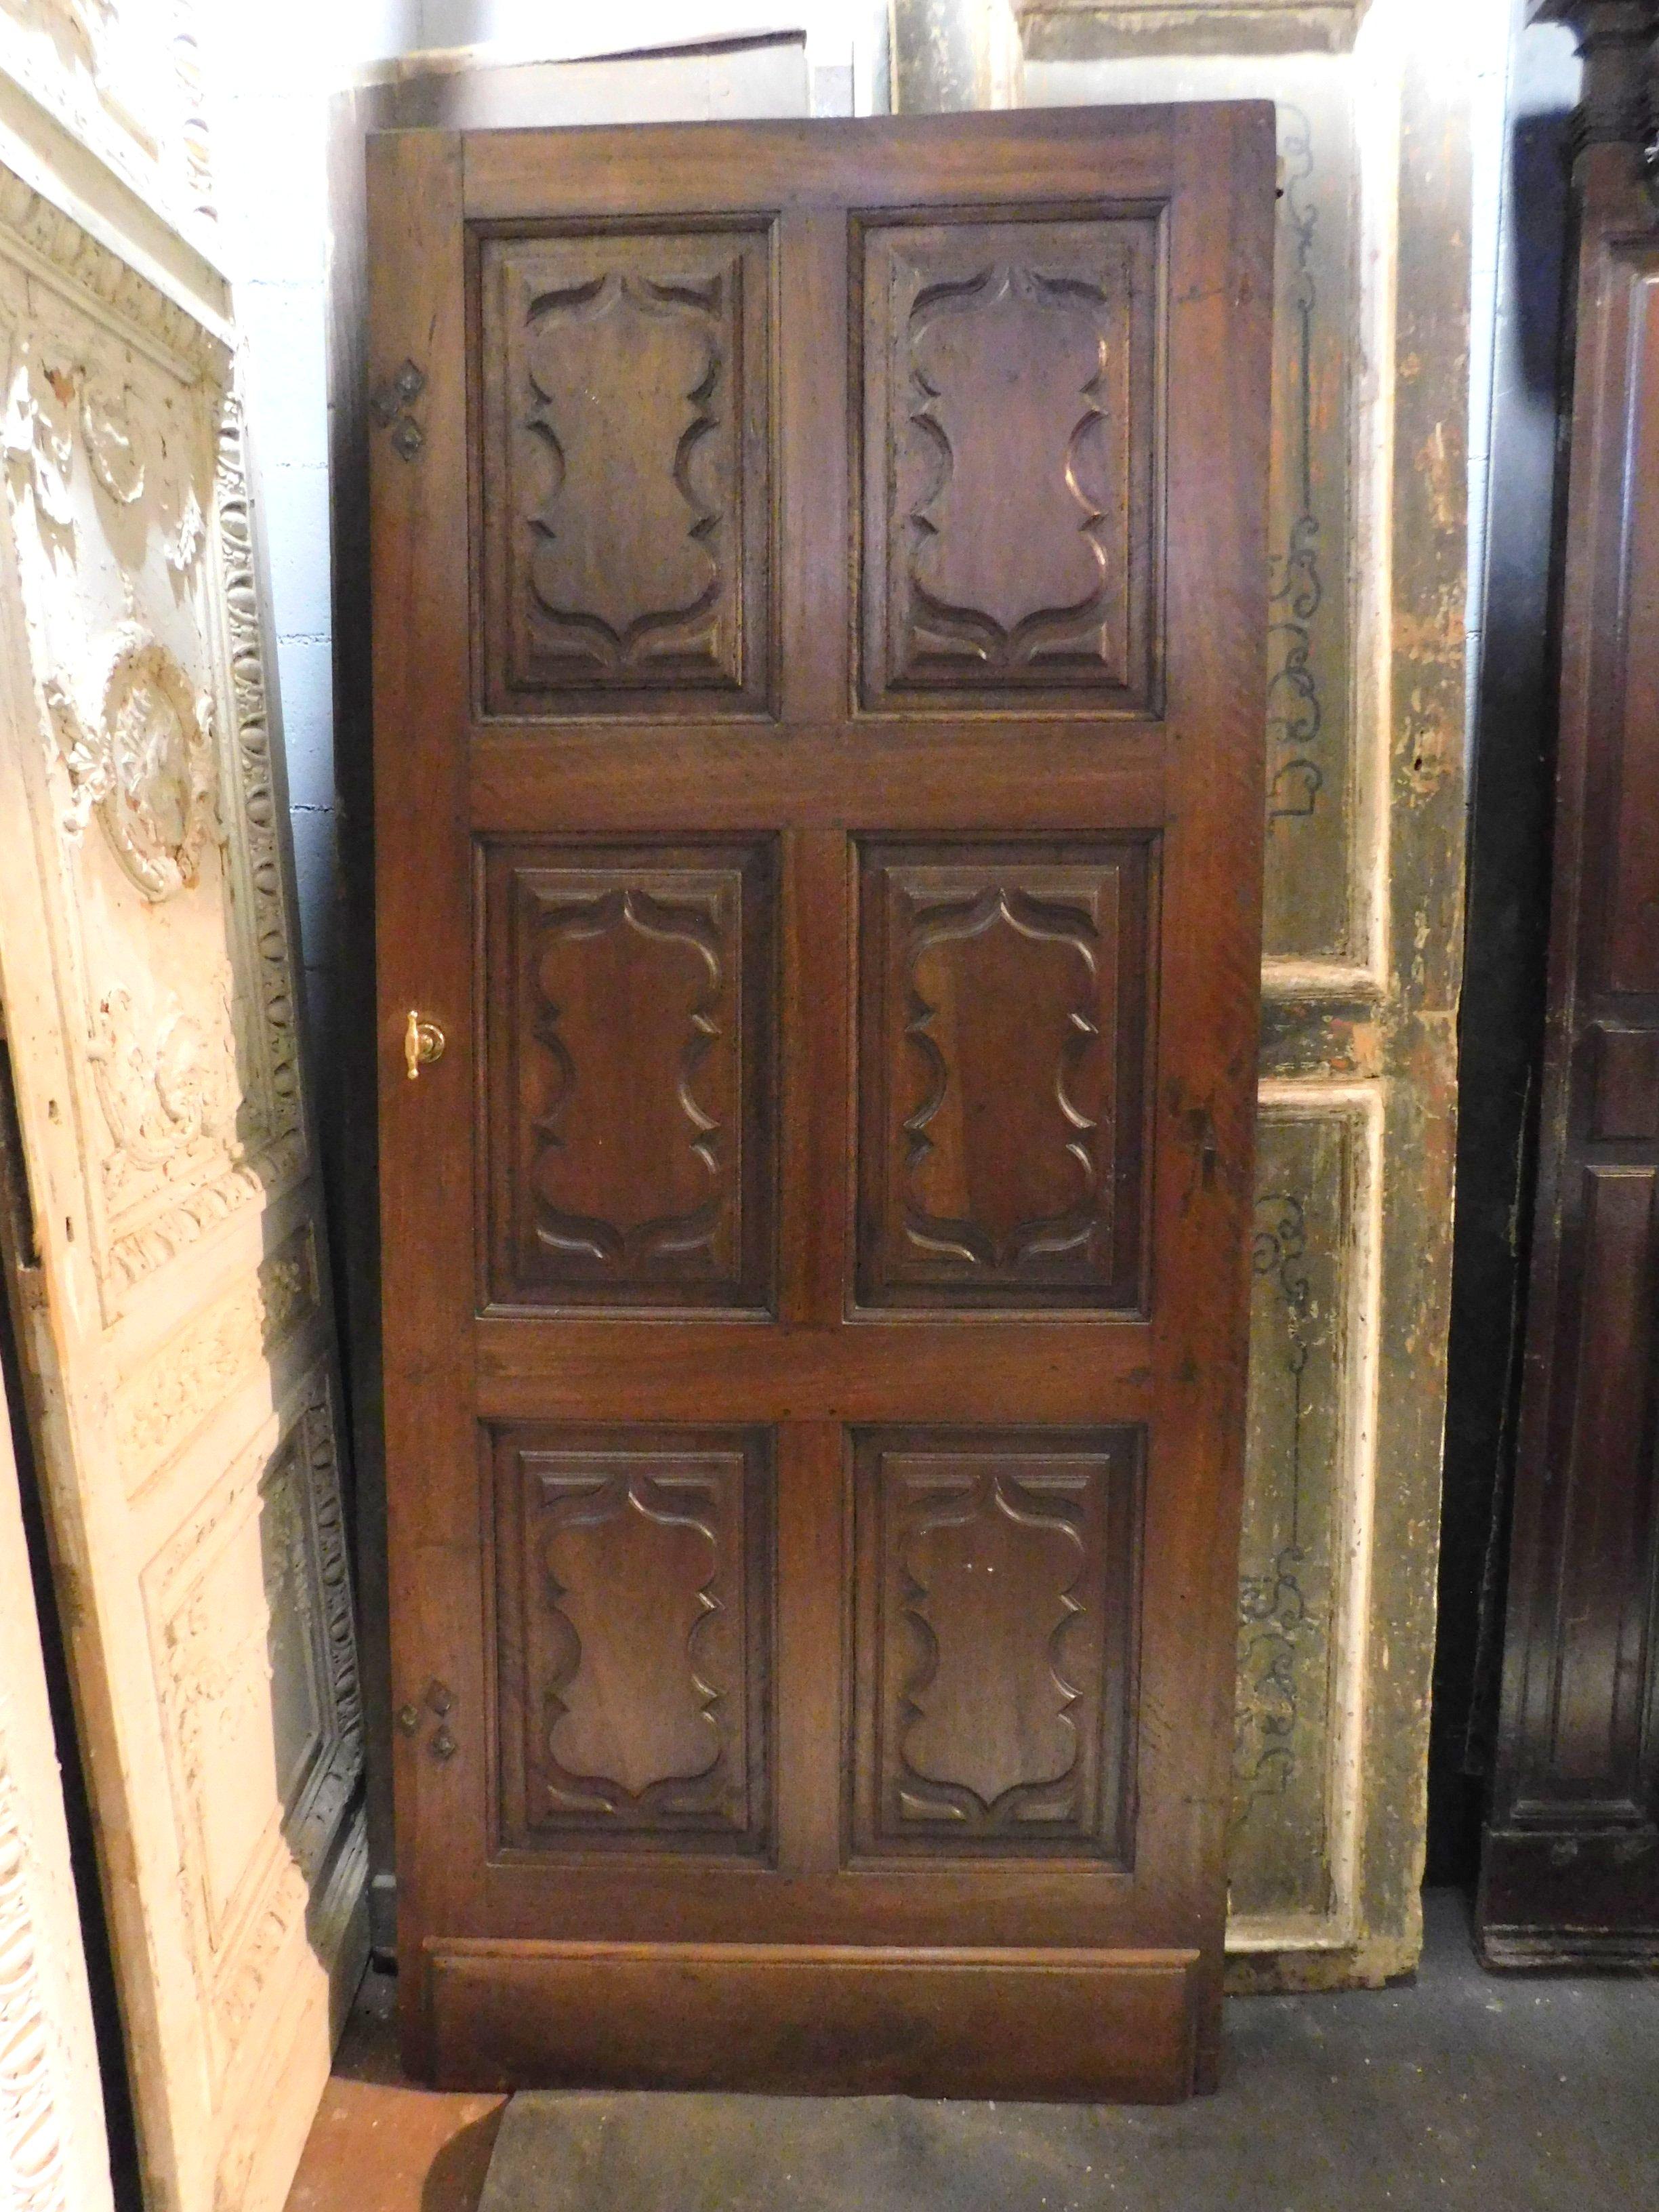 Ancient interior door in maroon walnut, classic and Italian, a material of great value, with six hand-carved panels and baroque tile, built in the 1700s in northern Italy. Classic and massive taste, beautiful also adapted to the modern contrasting